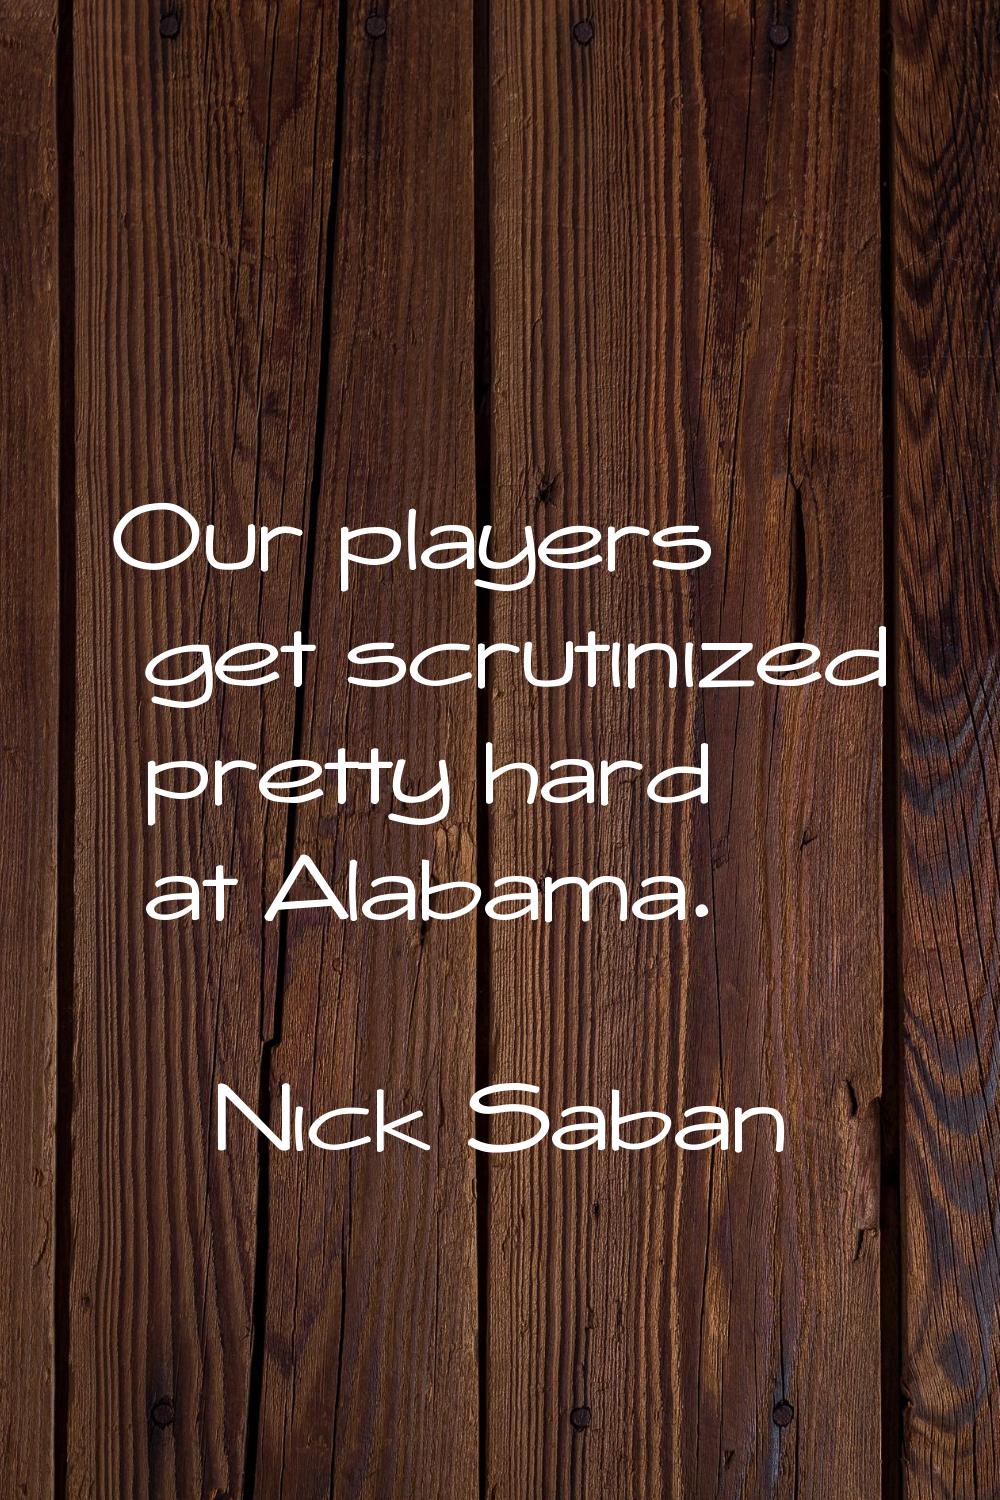 Our players get scrutinized pretty hard at Alabama.